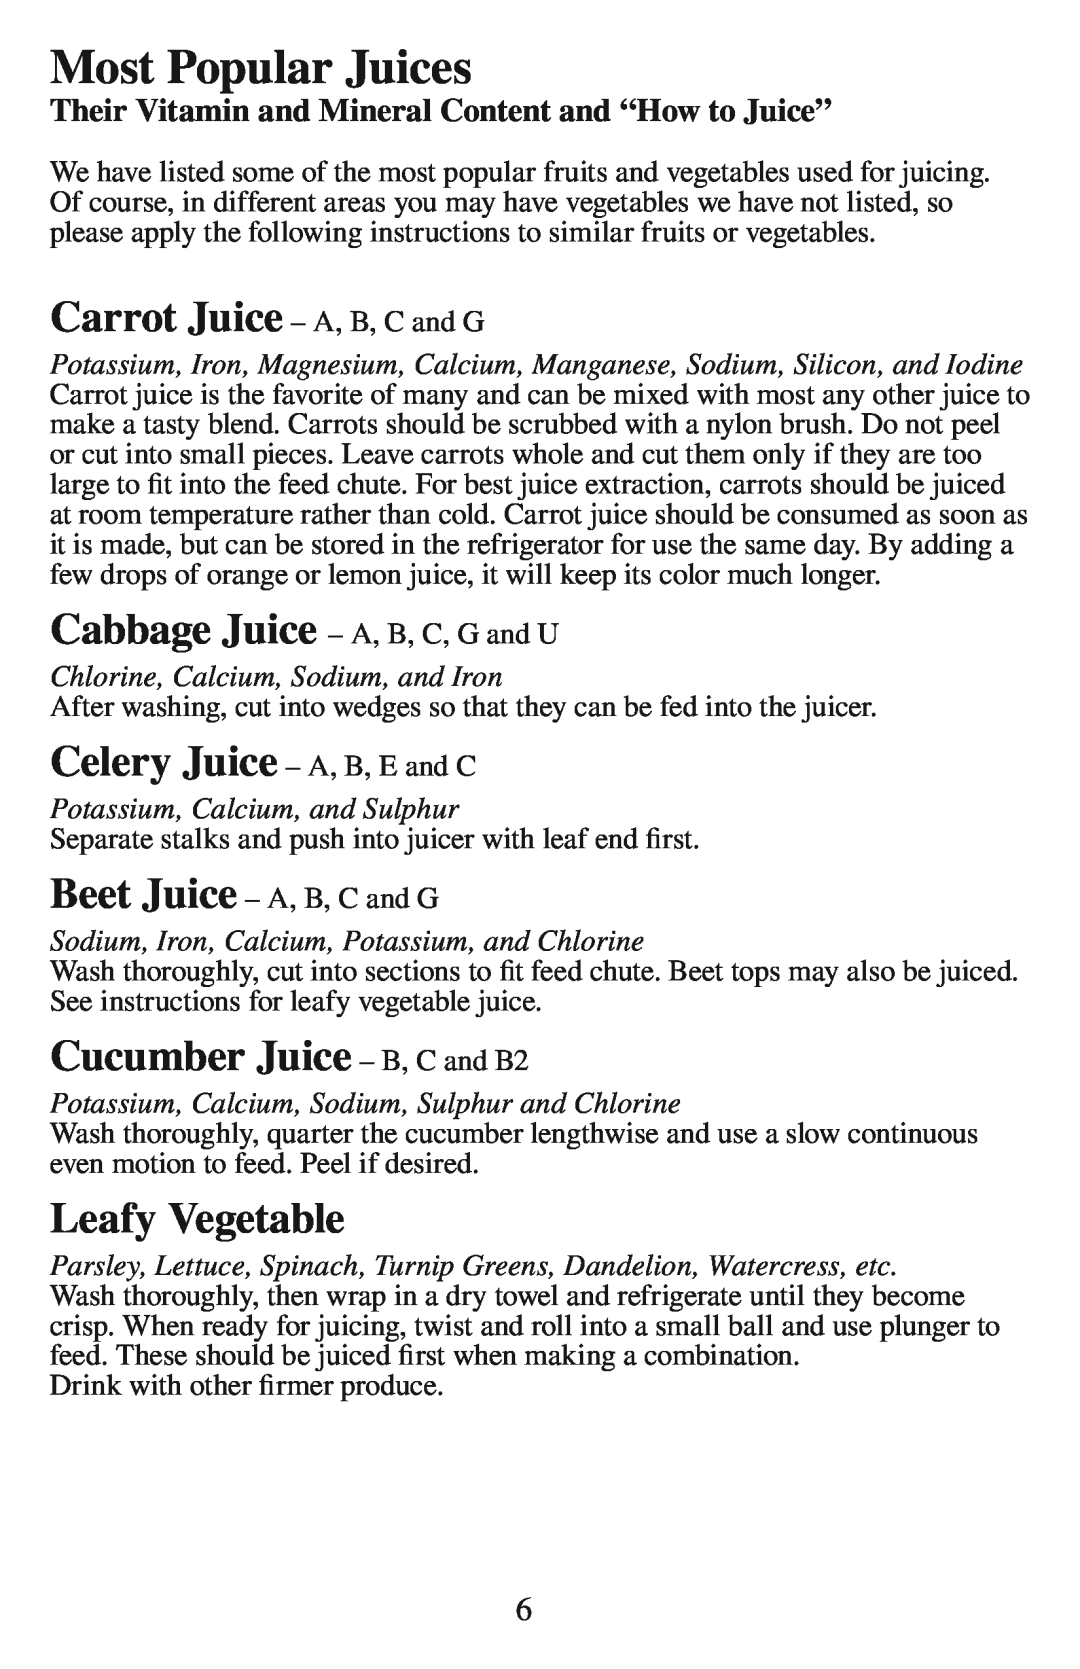 Acme Kitchenettes 6001 manual Most Popular Juices, Cucumber Juice - B, C and B2, Leafy Vegetable 